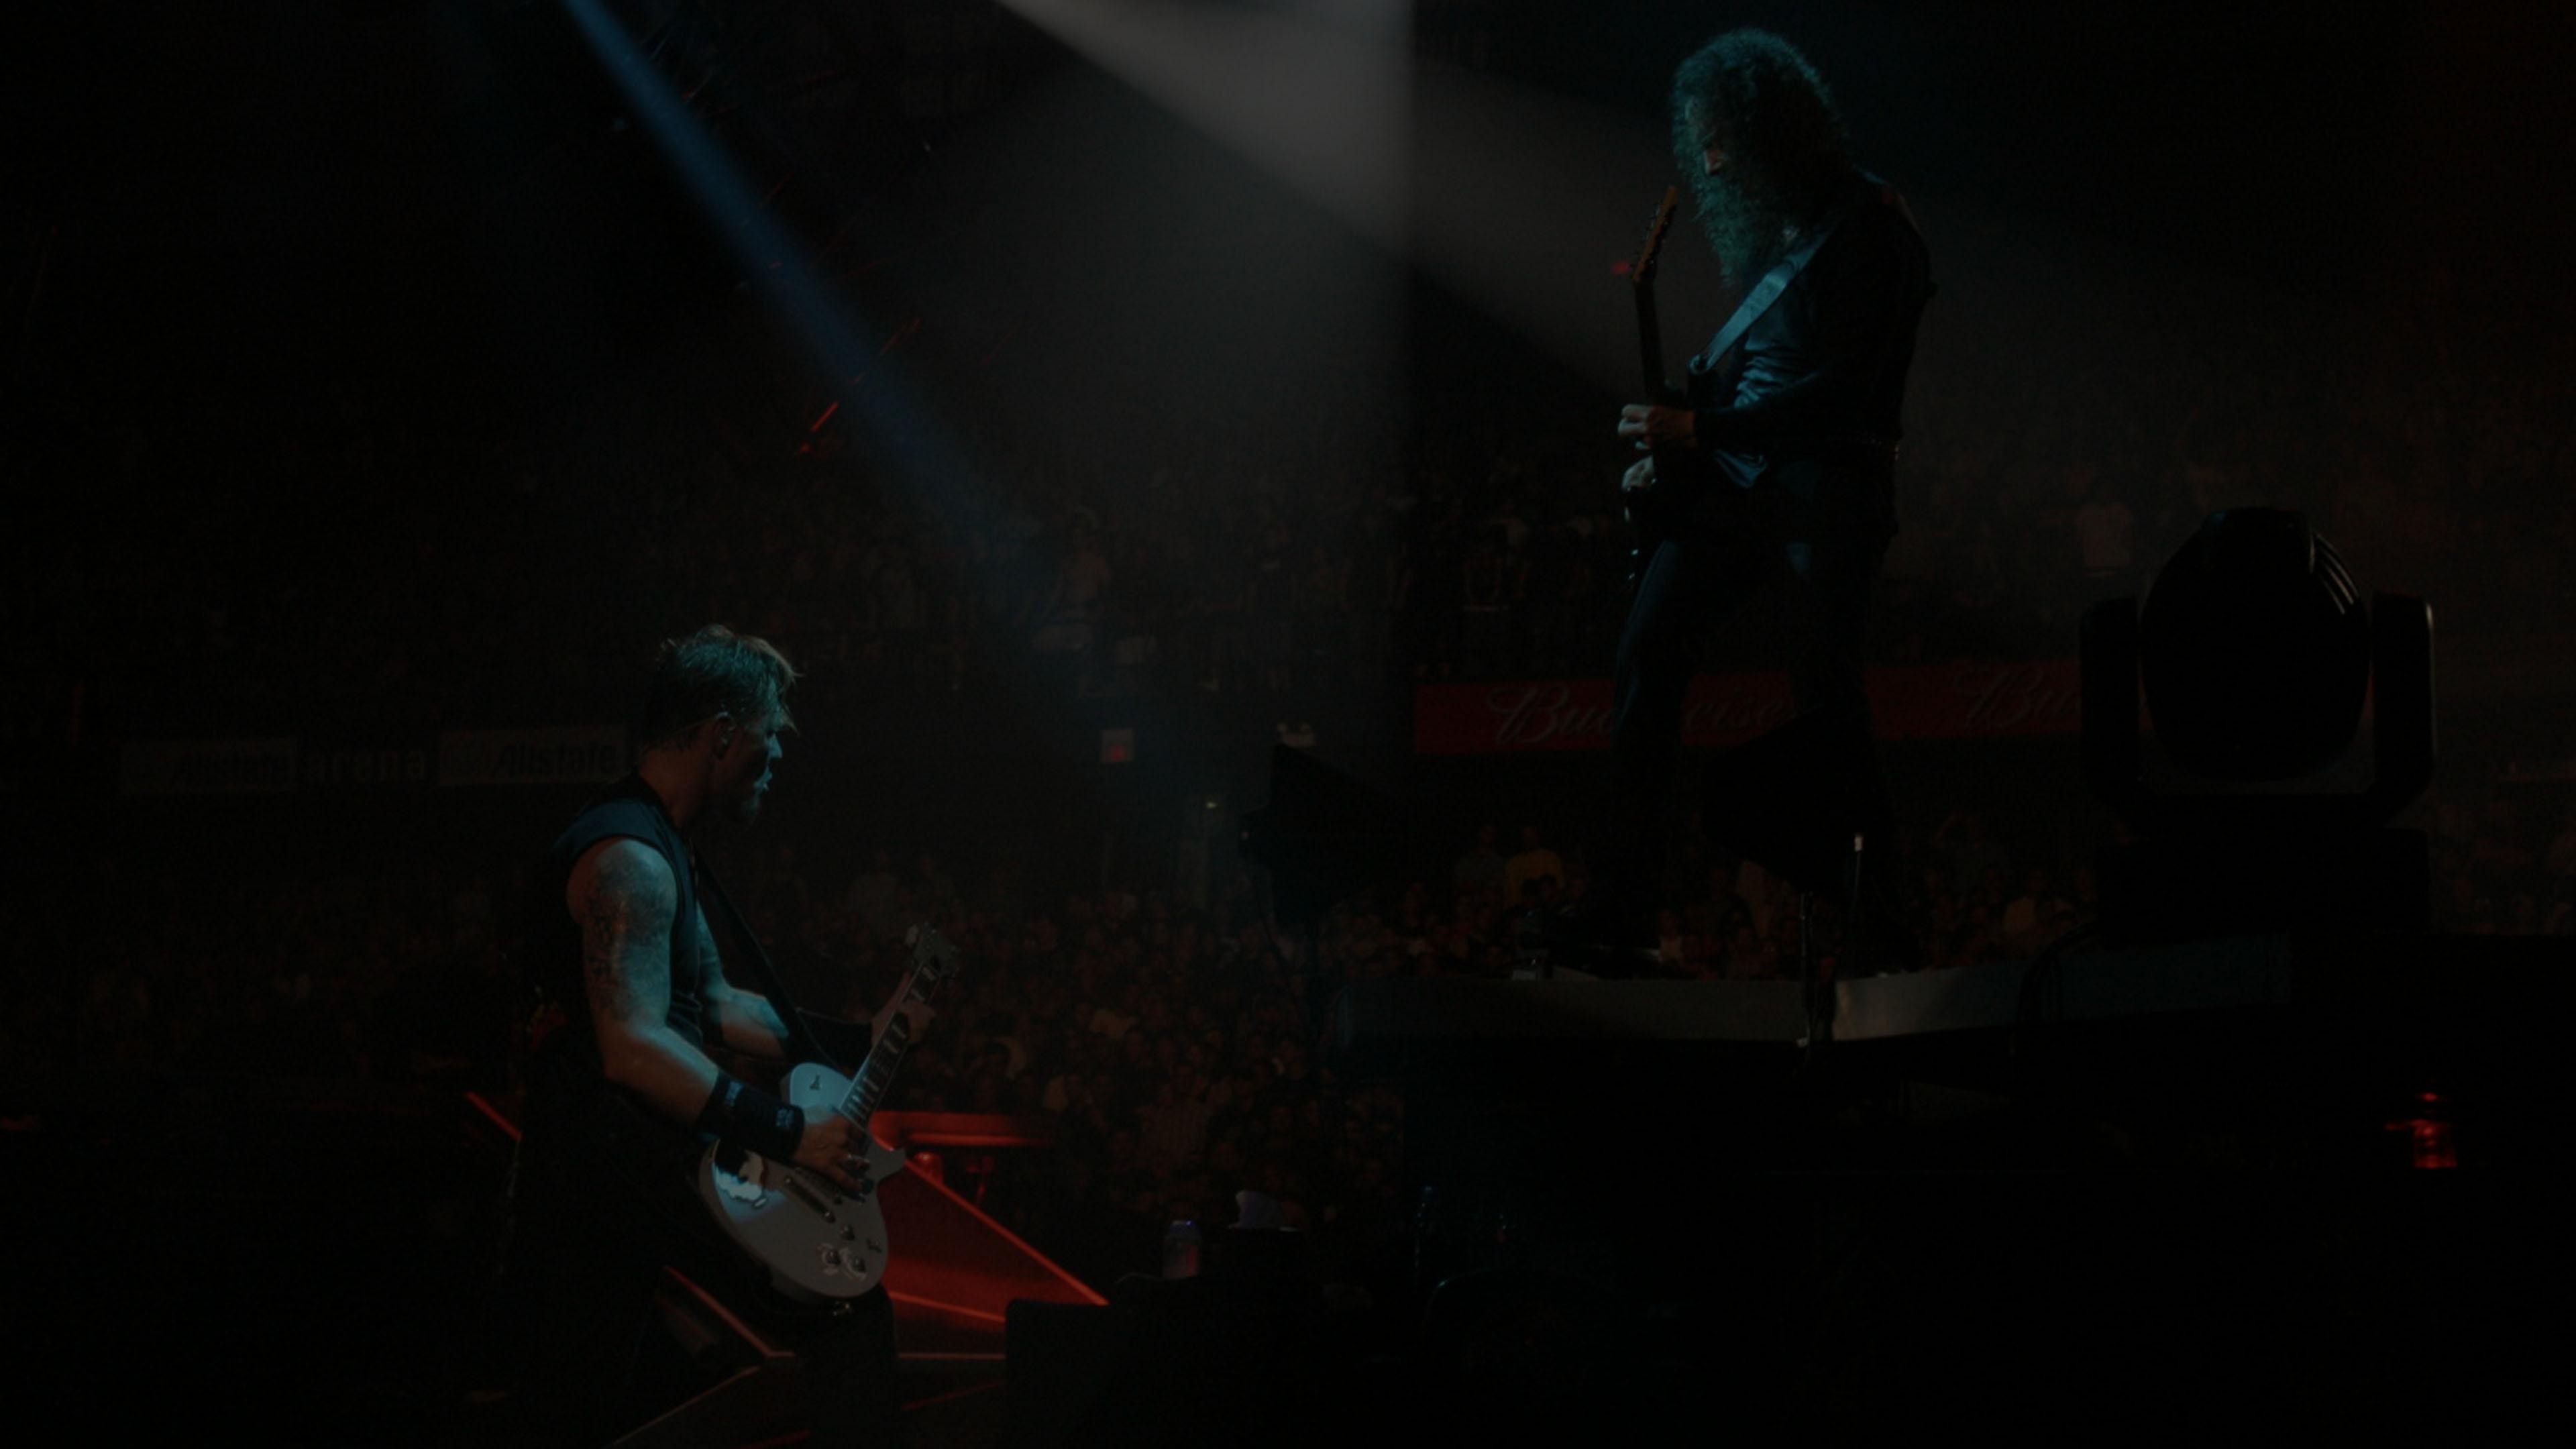 Metallica at Allstate Arena in Chicago, IL on August 27, 2004